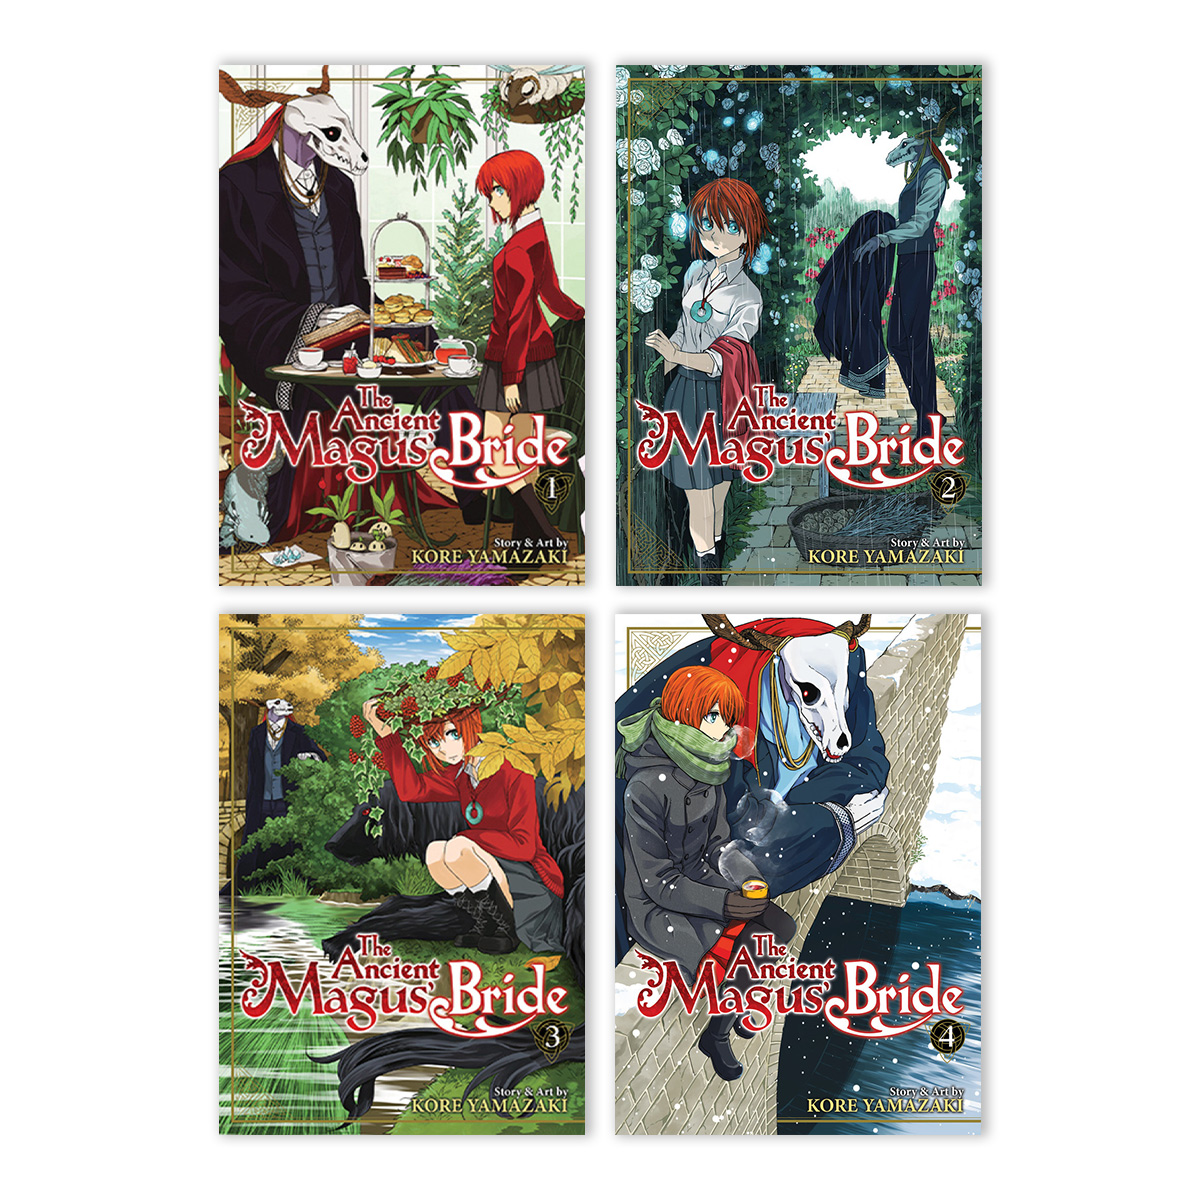 The Ancient Magus Bride: Volume 3